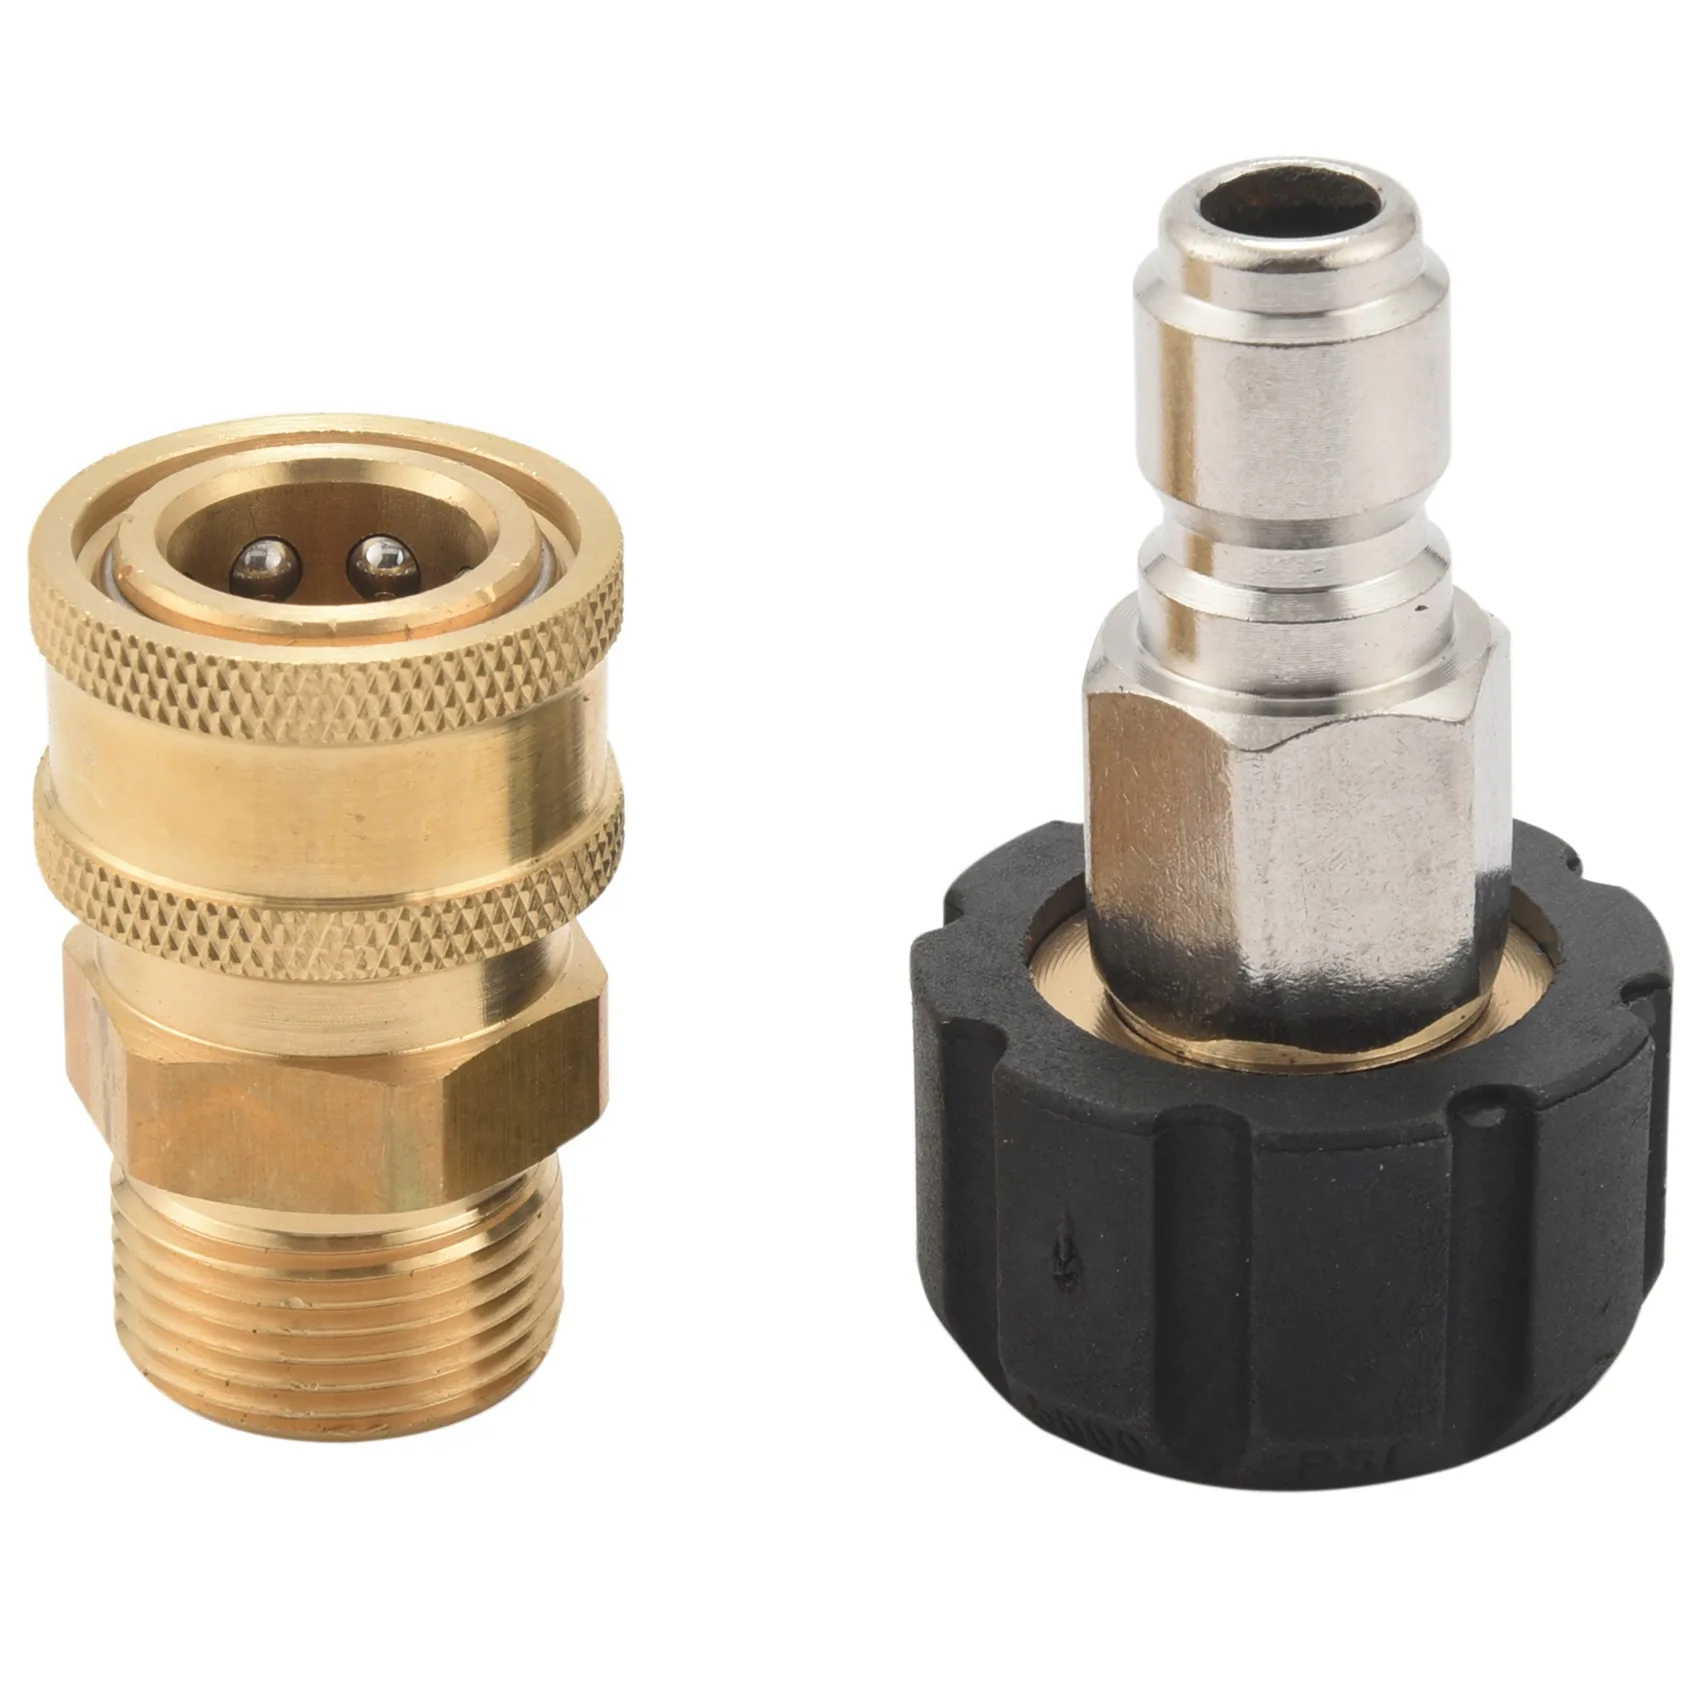 

Pressure Washer Adapter Set, Quick Connect Kit, Metric M22 15Mm Female Swivel To M22 Male Fitting, 5000 Psi